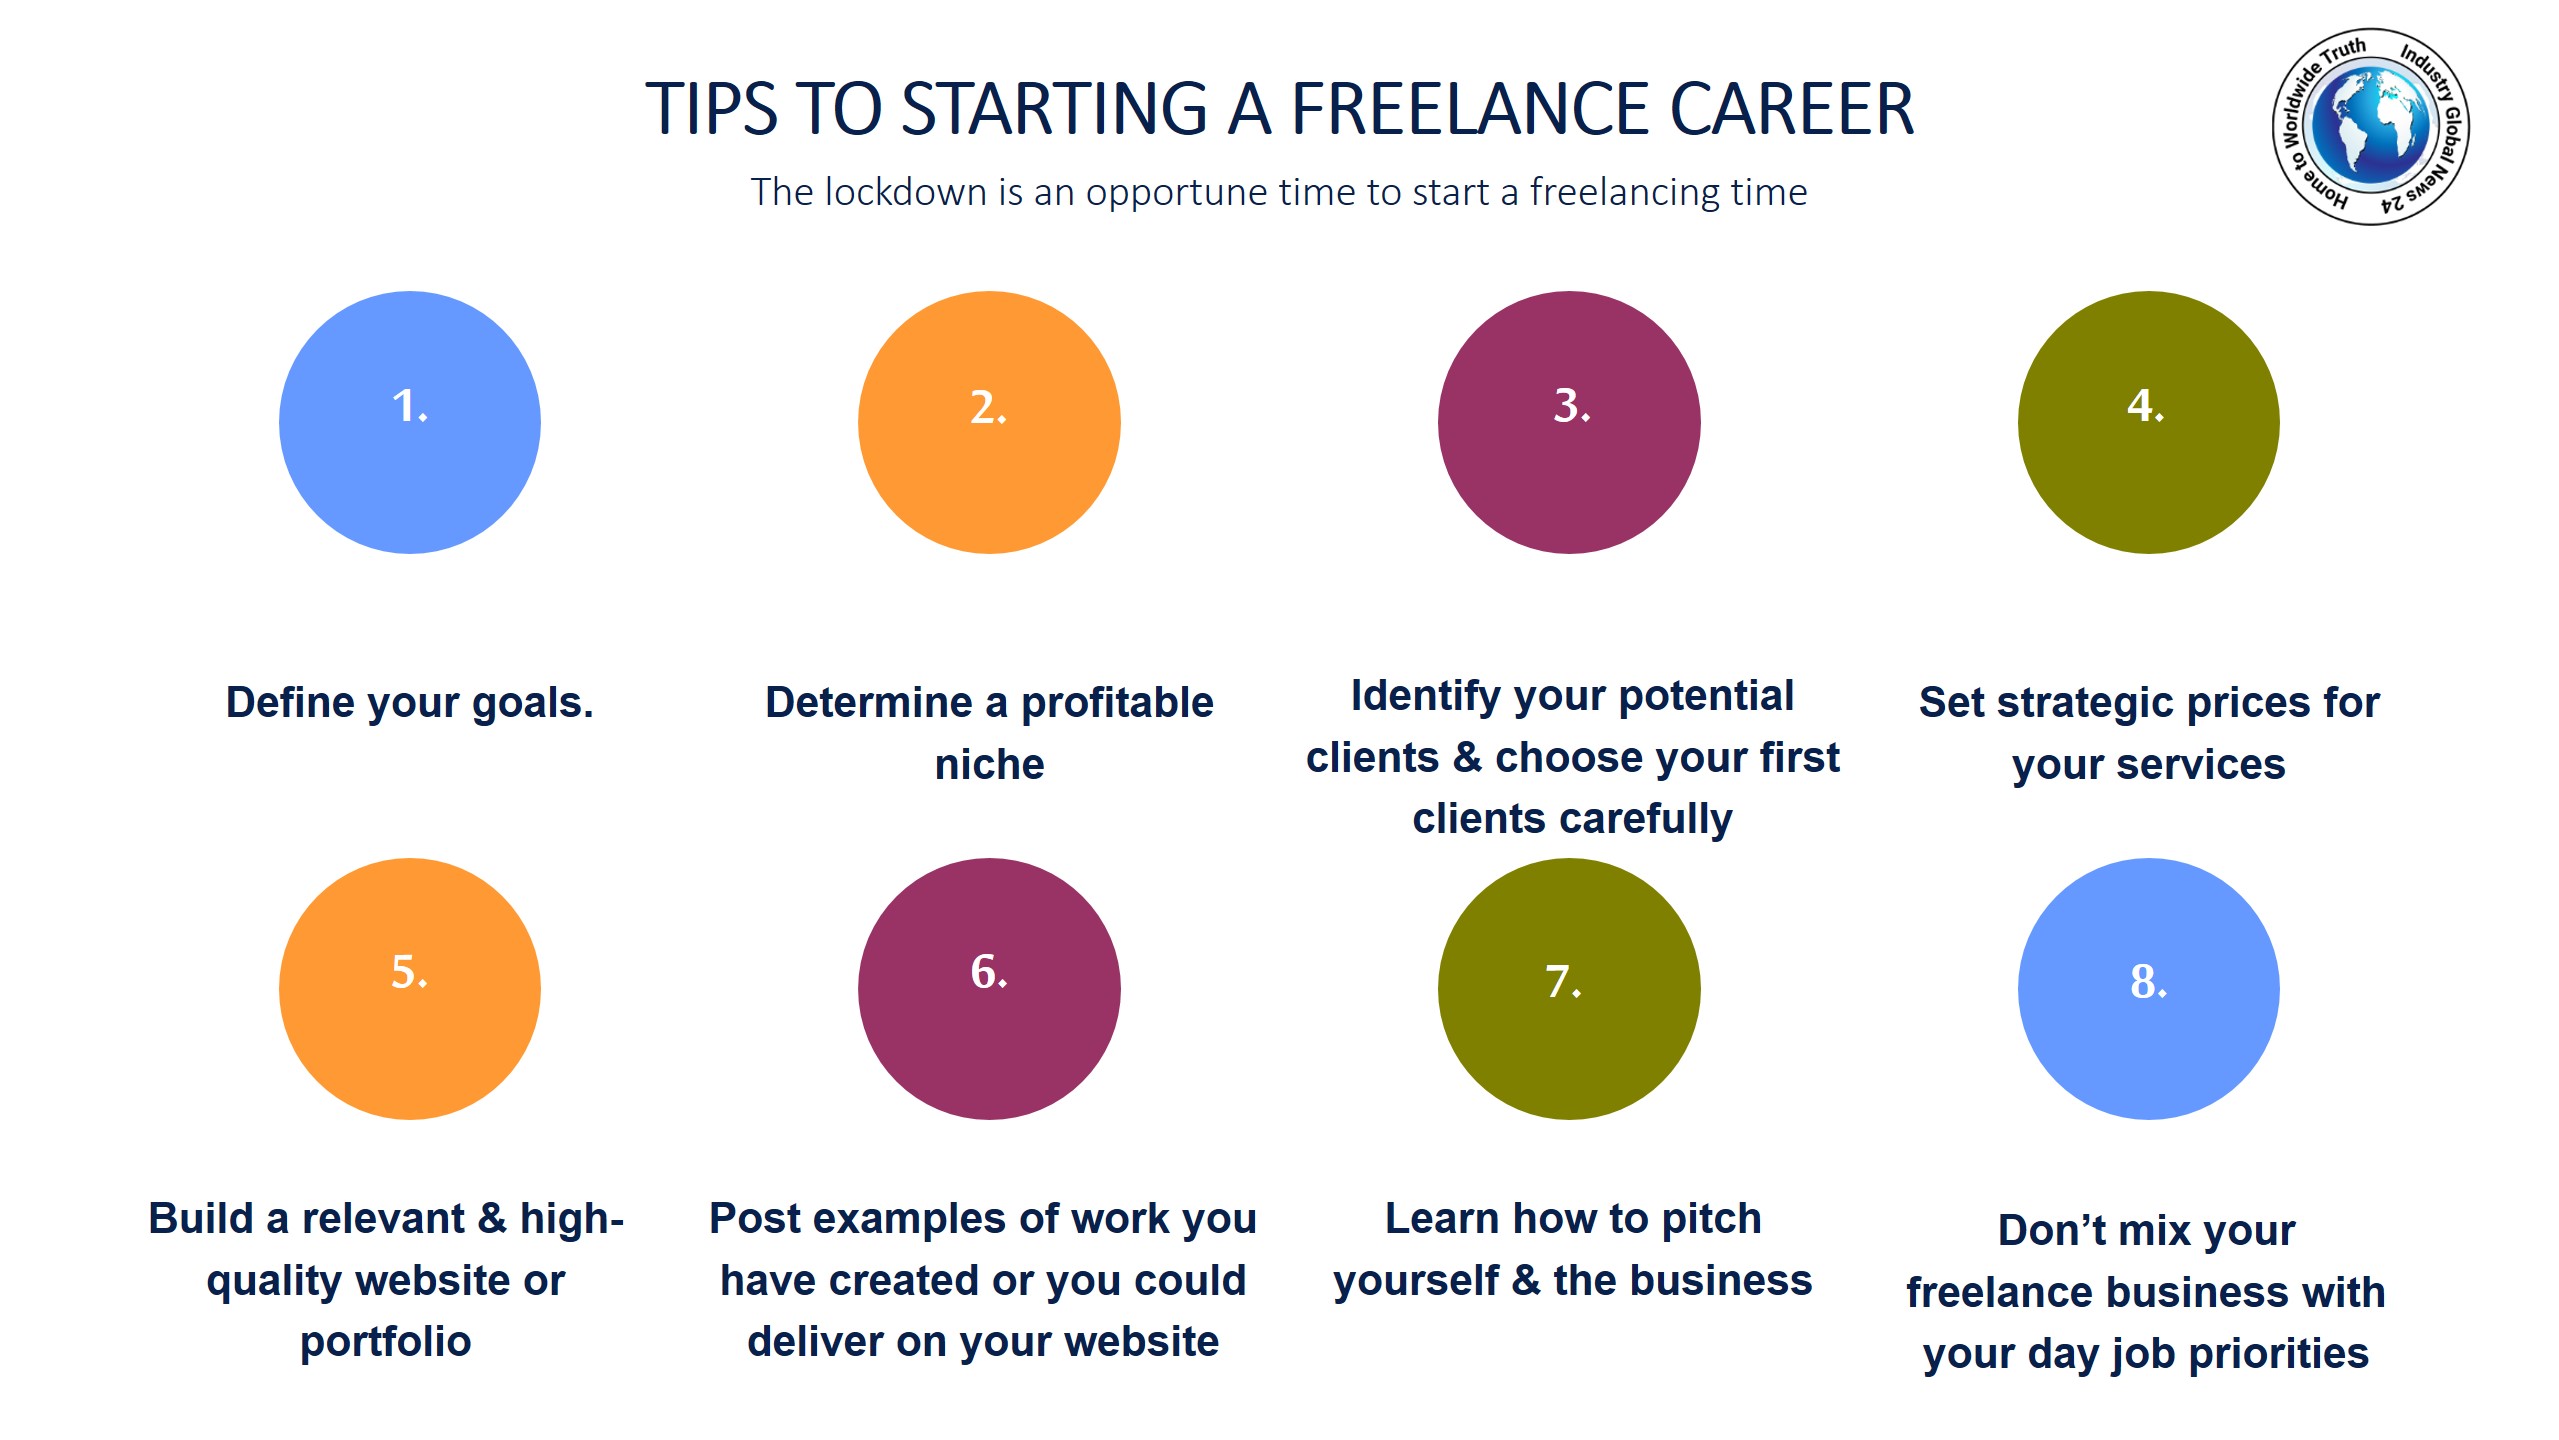 Tips to starting a freelance career